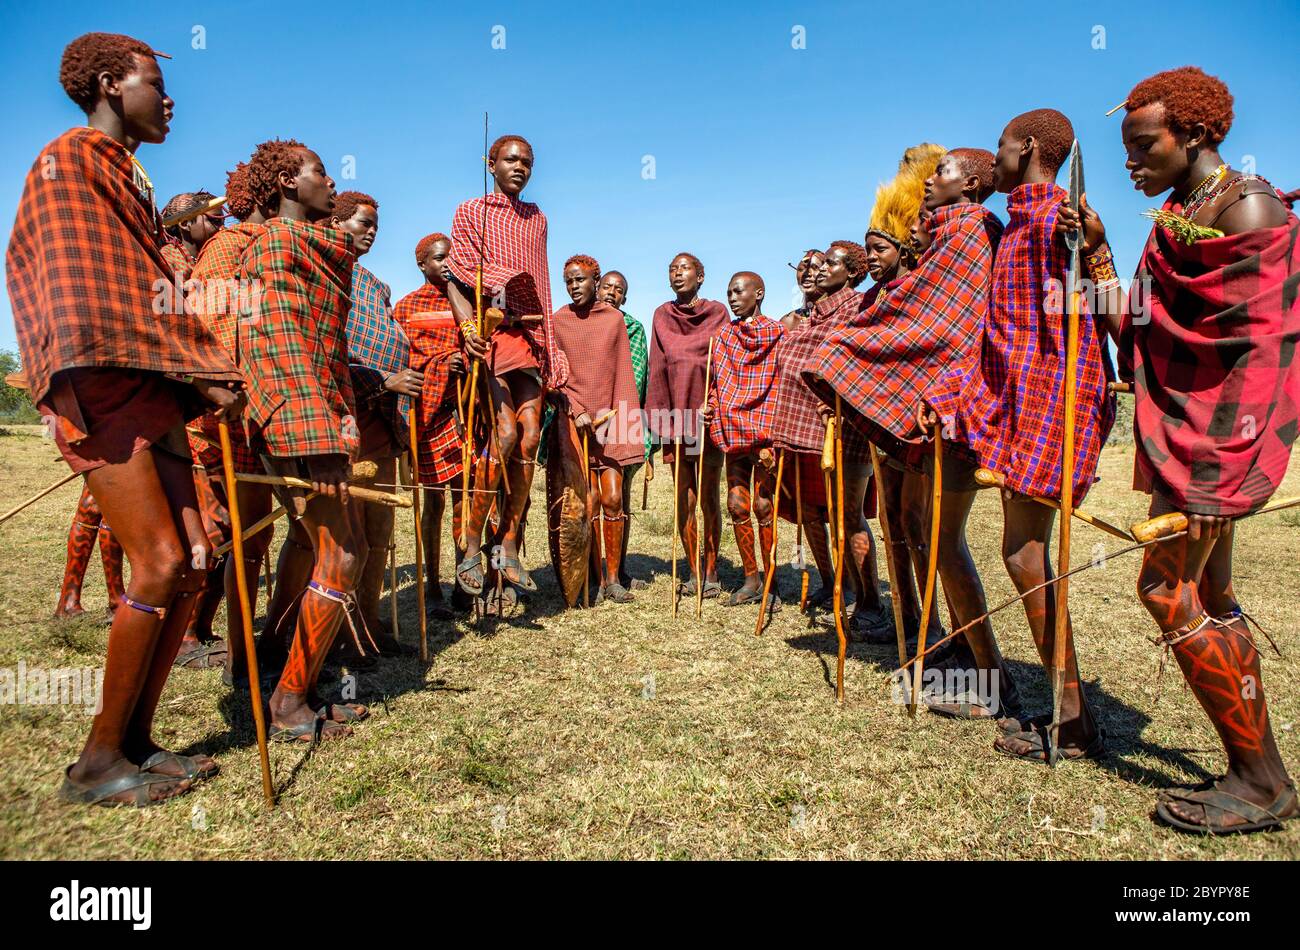 Group of young Masai warriors in traditional clothes and weapons are dancing their ritual dance in the savannah. Tanzania, East Africa. Stock Photo